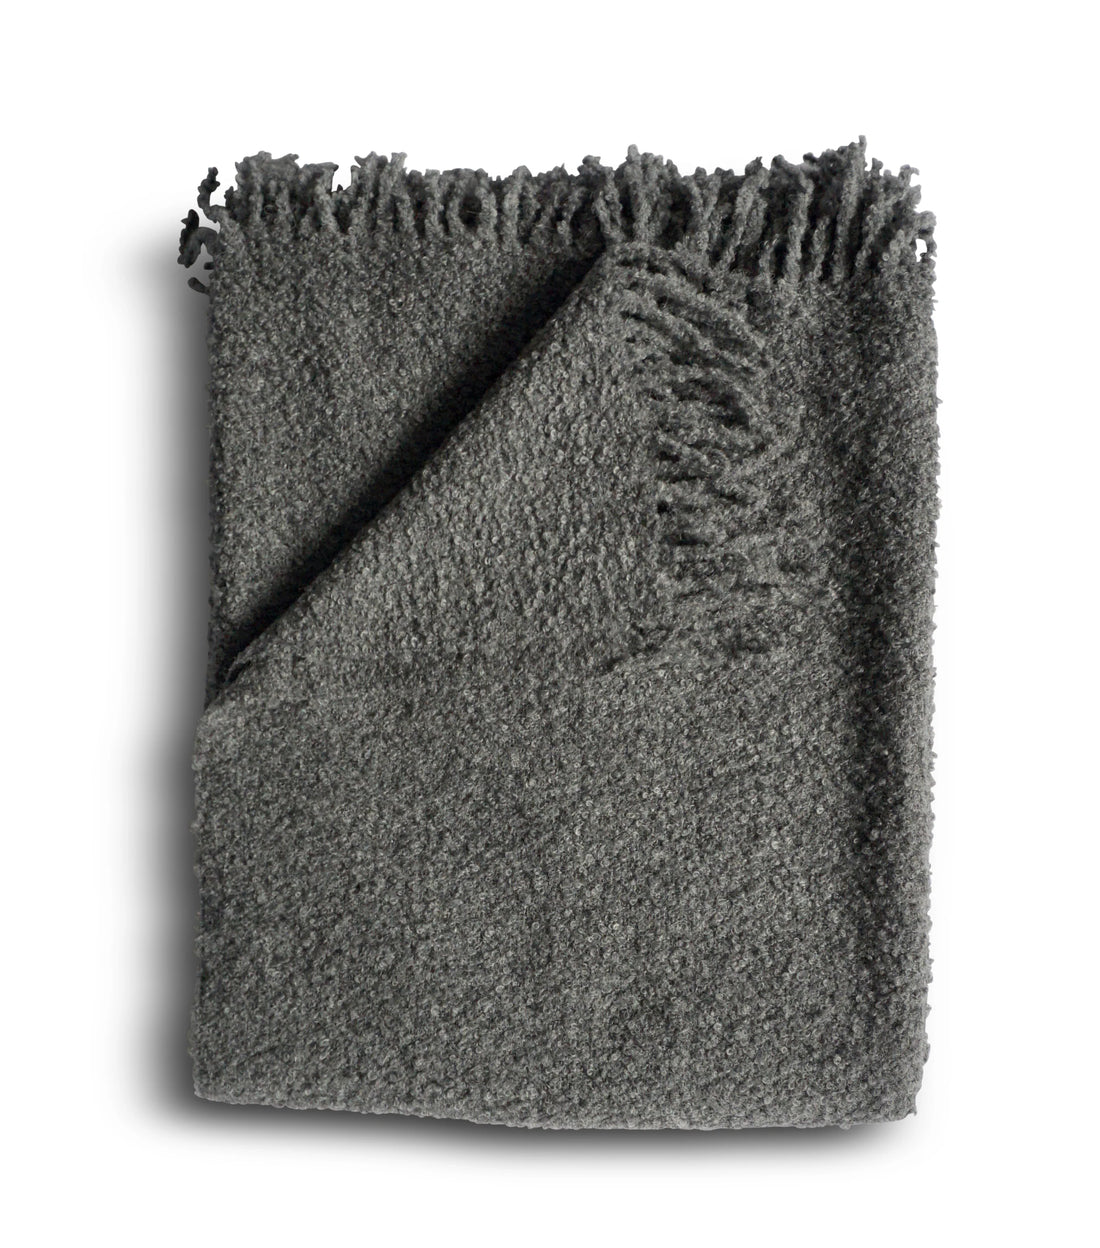 Folded Baby Alpaca Boucle throw blanket in charcoal color: Graphite